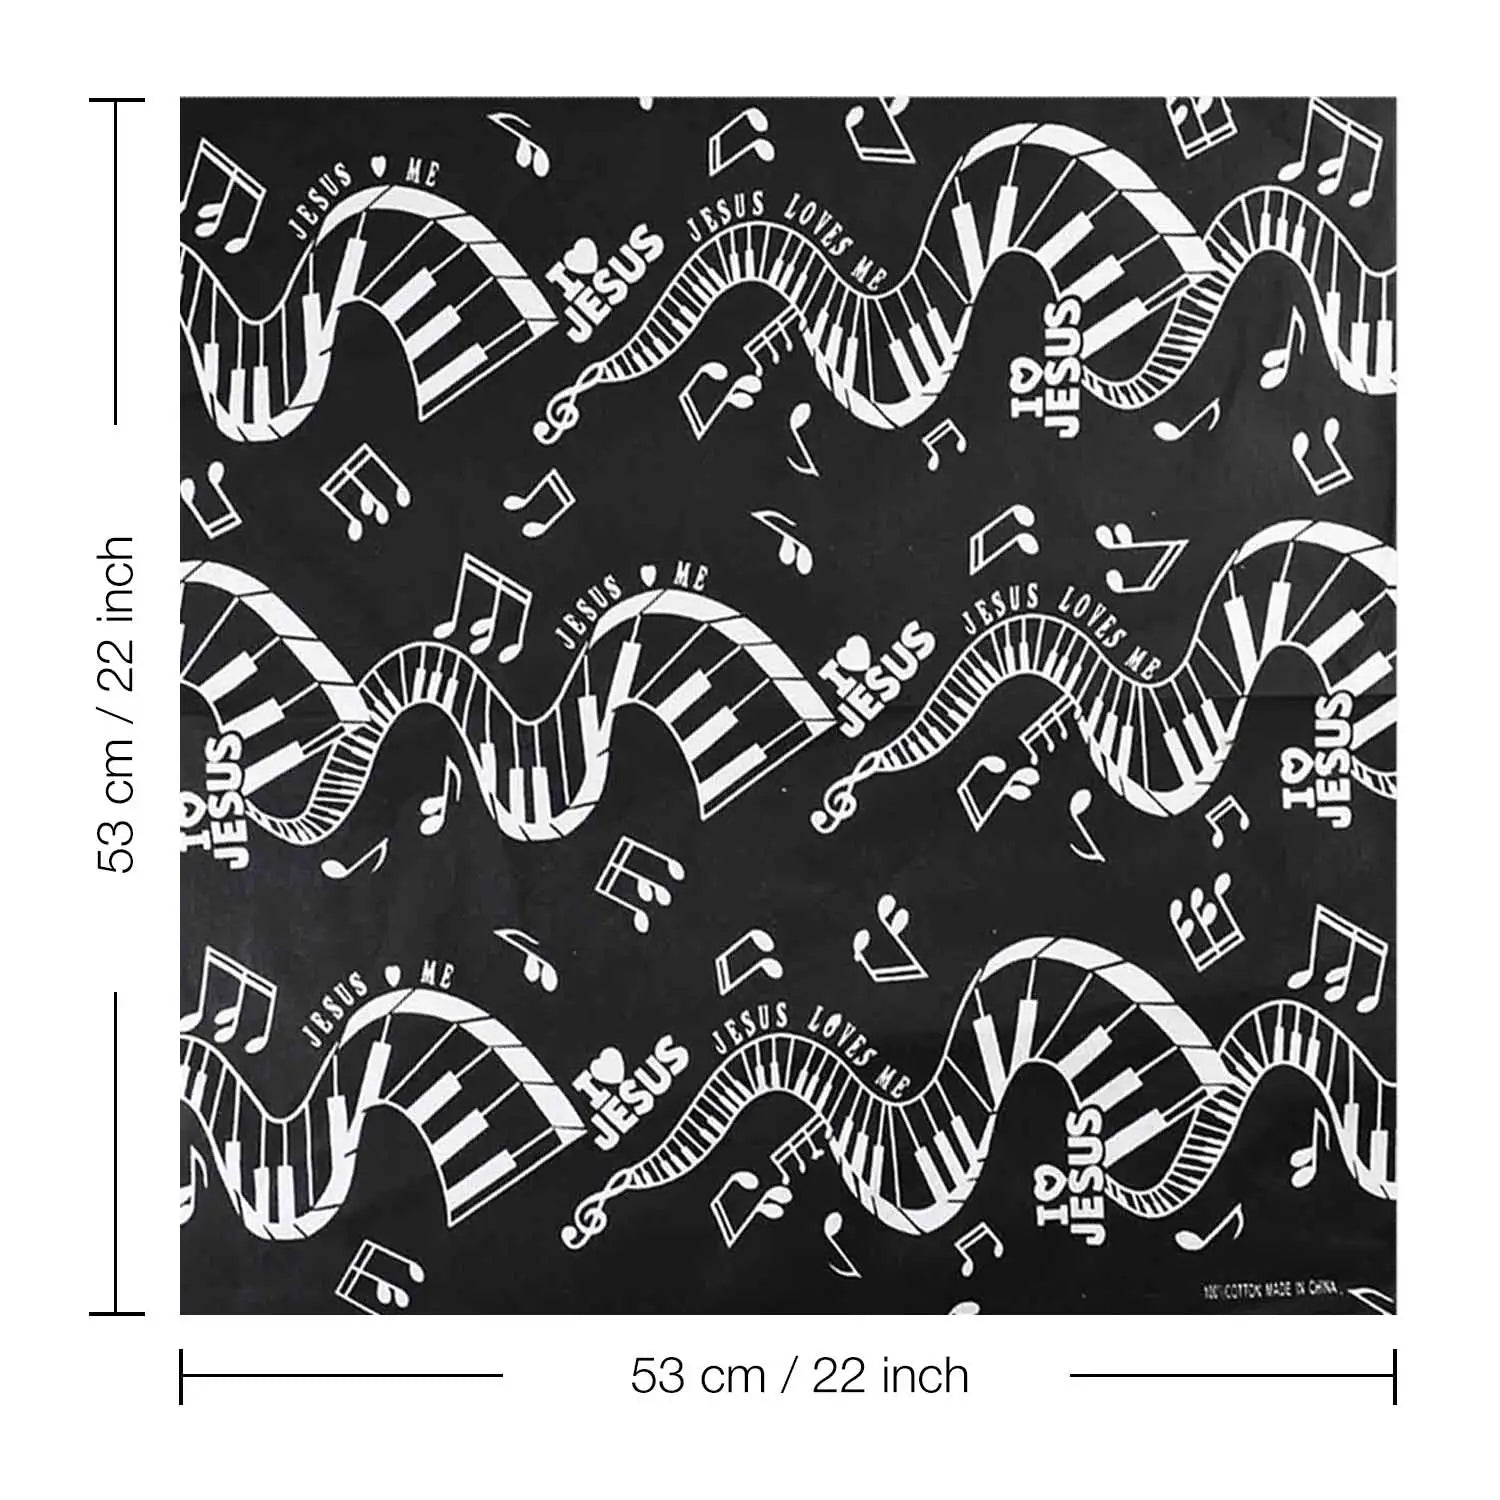 Black and white musical clef note patterned bandana set